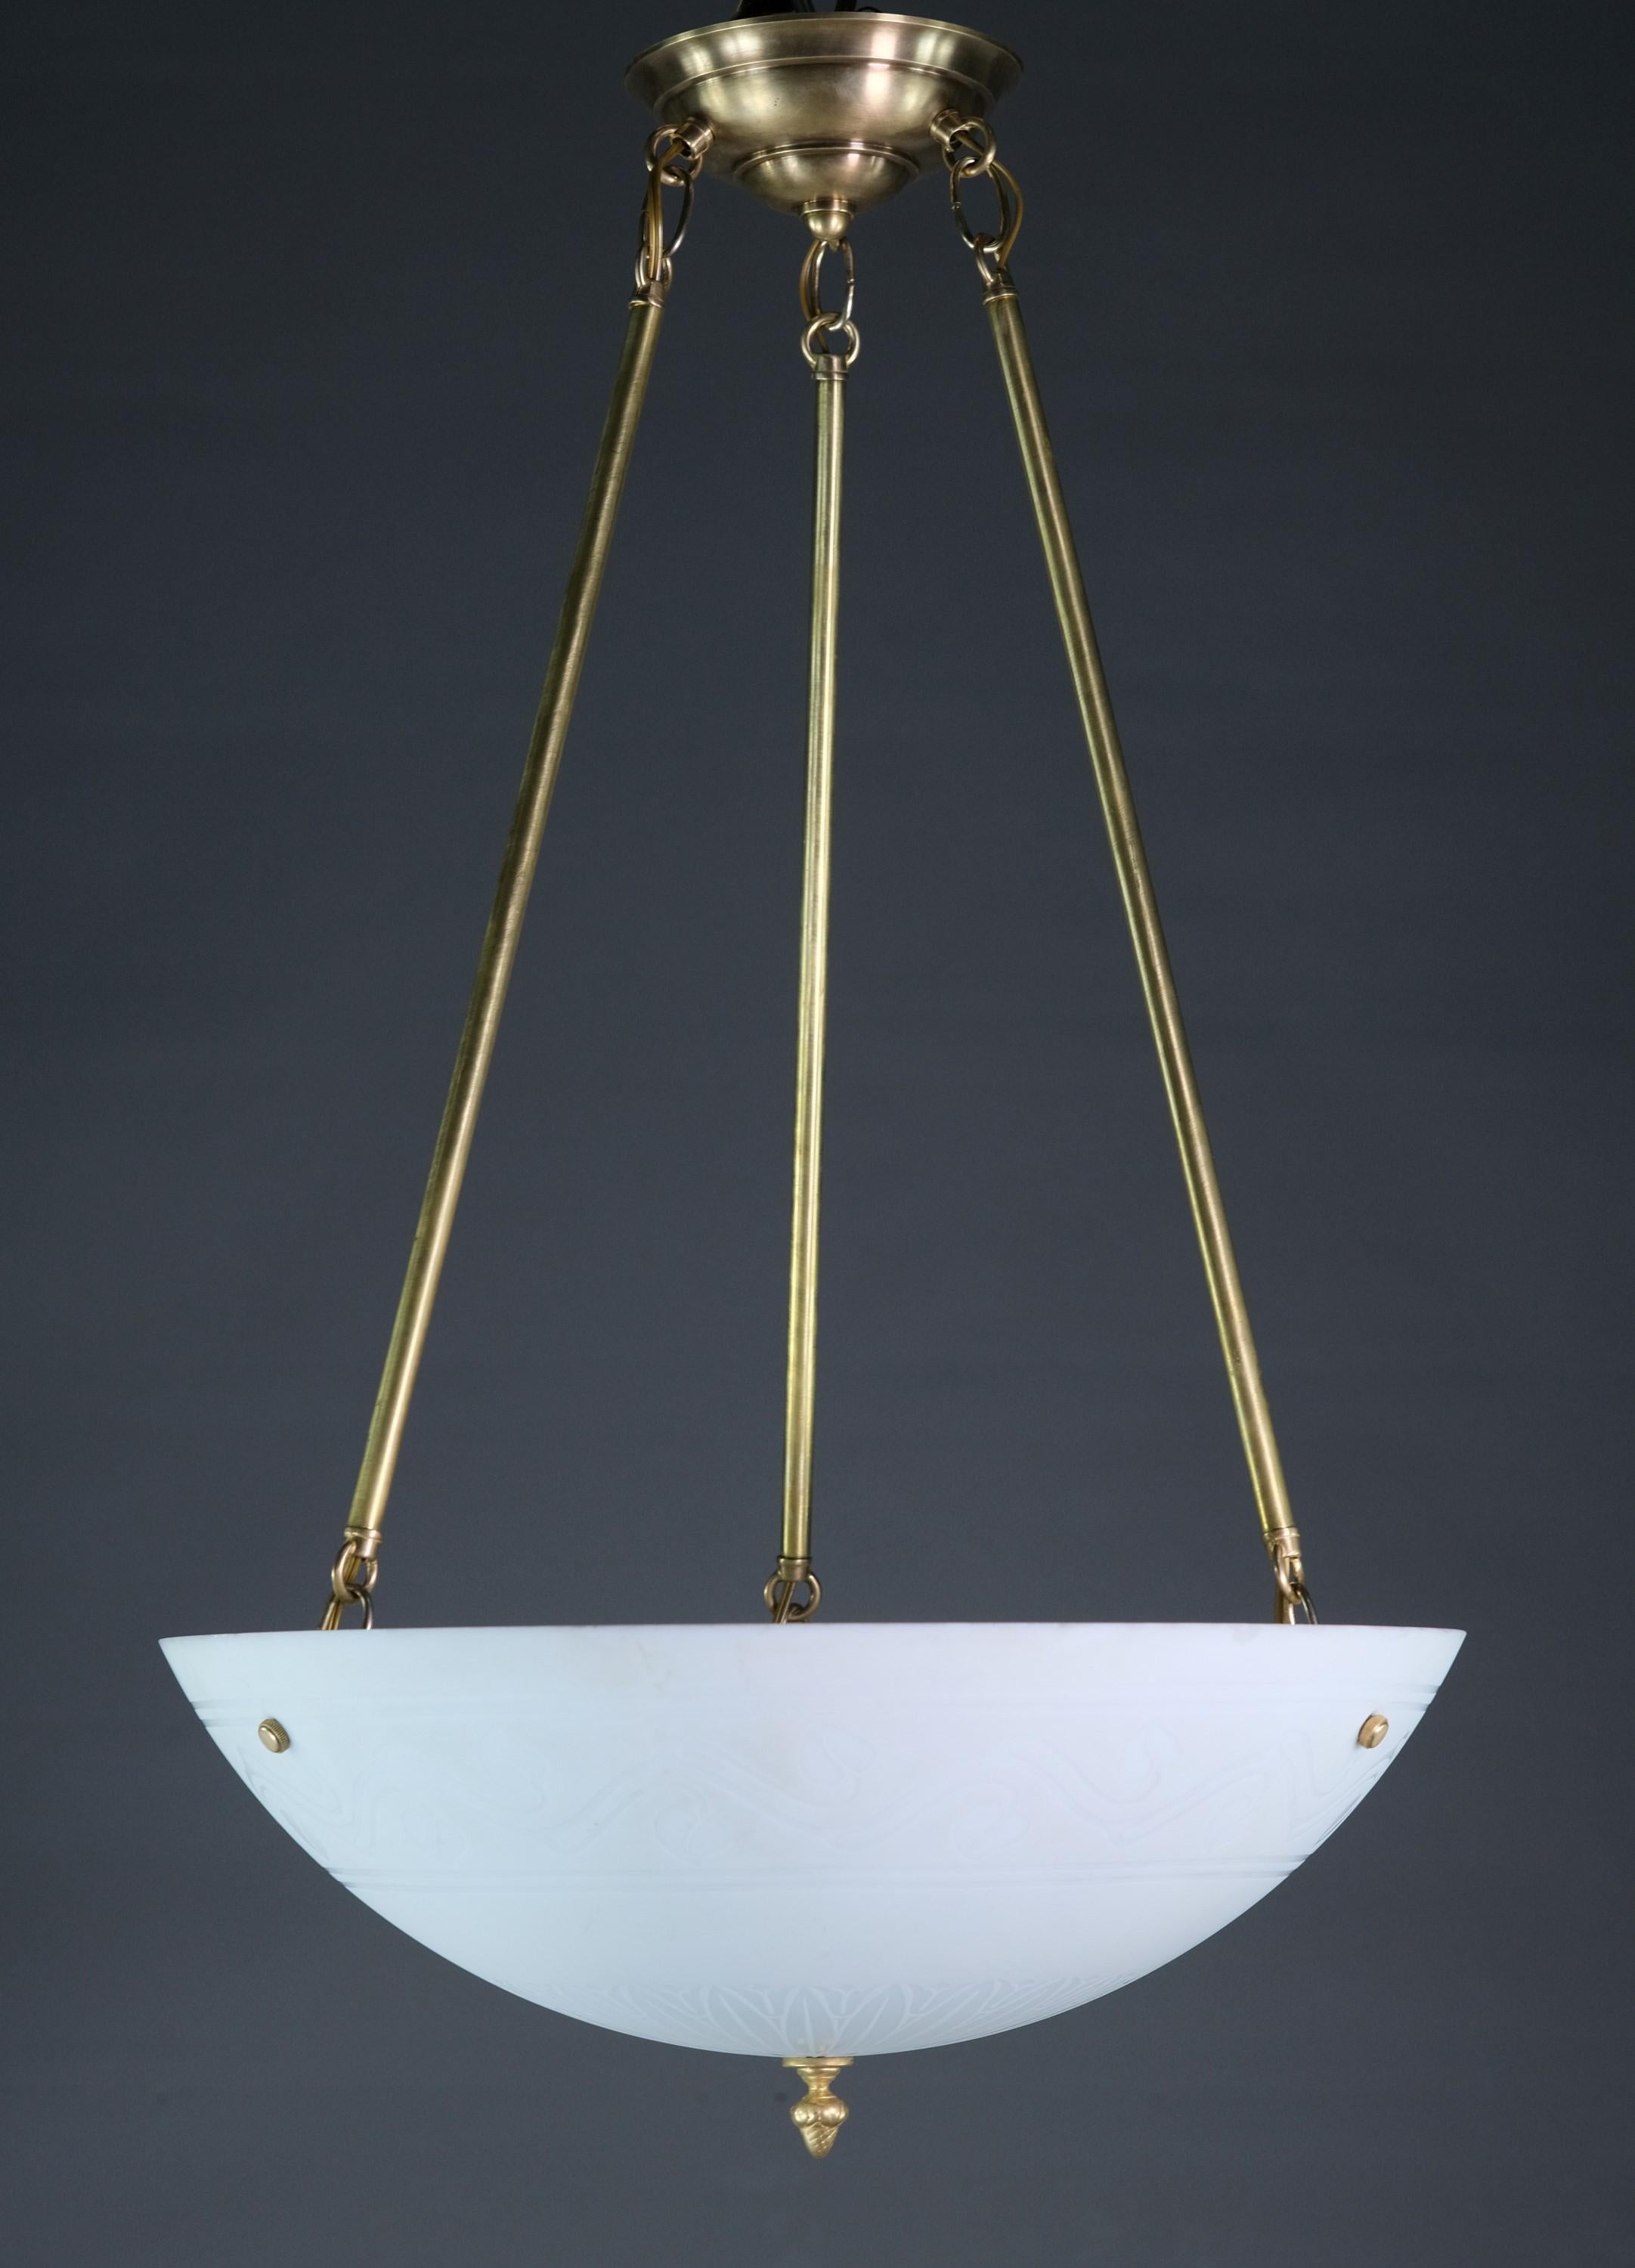 Rewired and restored 20th century pendant light. Featuring a while glass dish shade with three pole supports and matching canopy. Dish has leaves etched around the outside rim. Takes three E26 standard household lightbulbs.